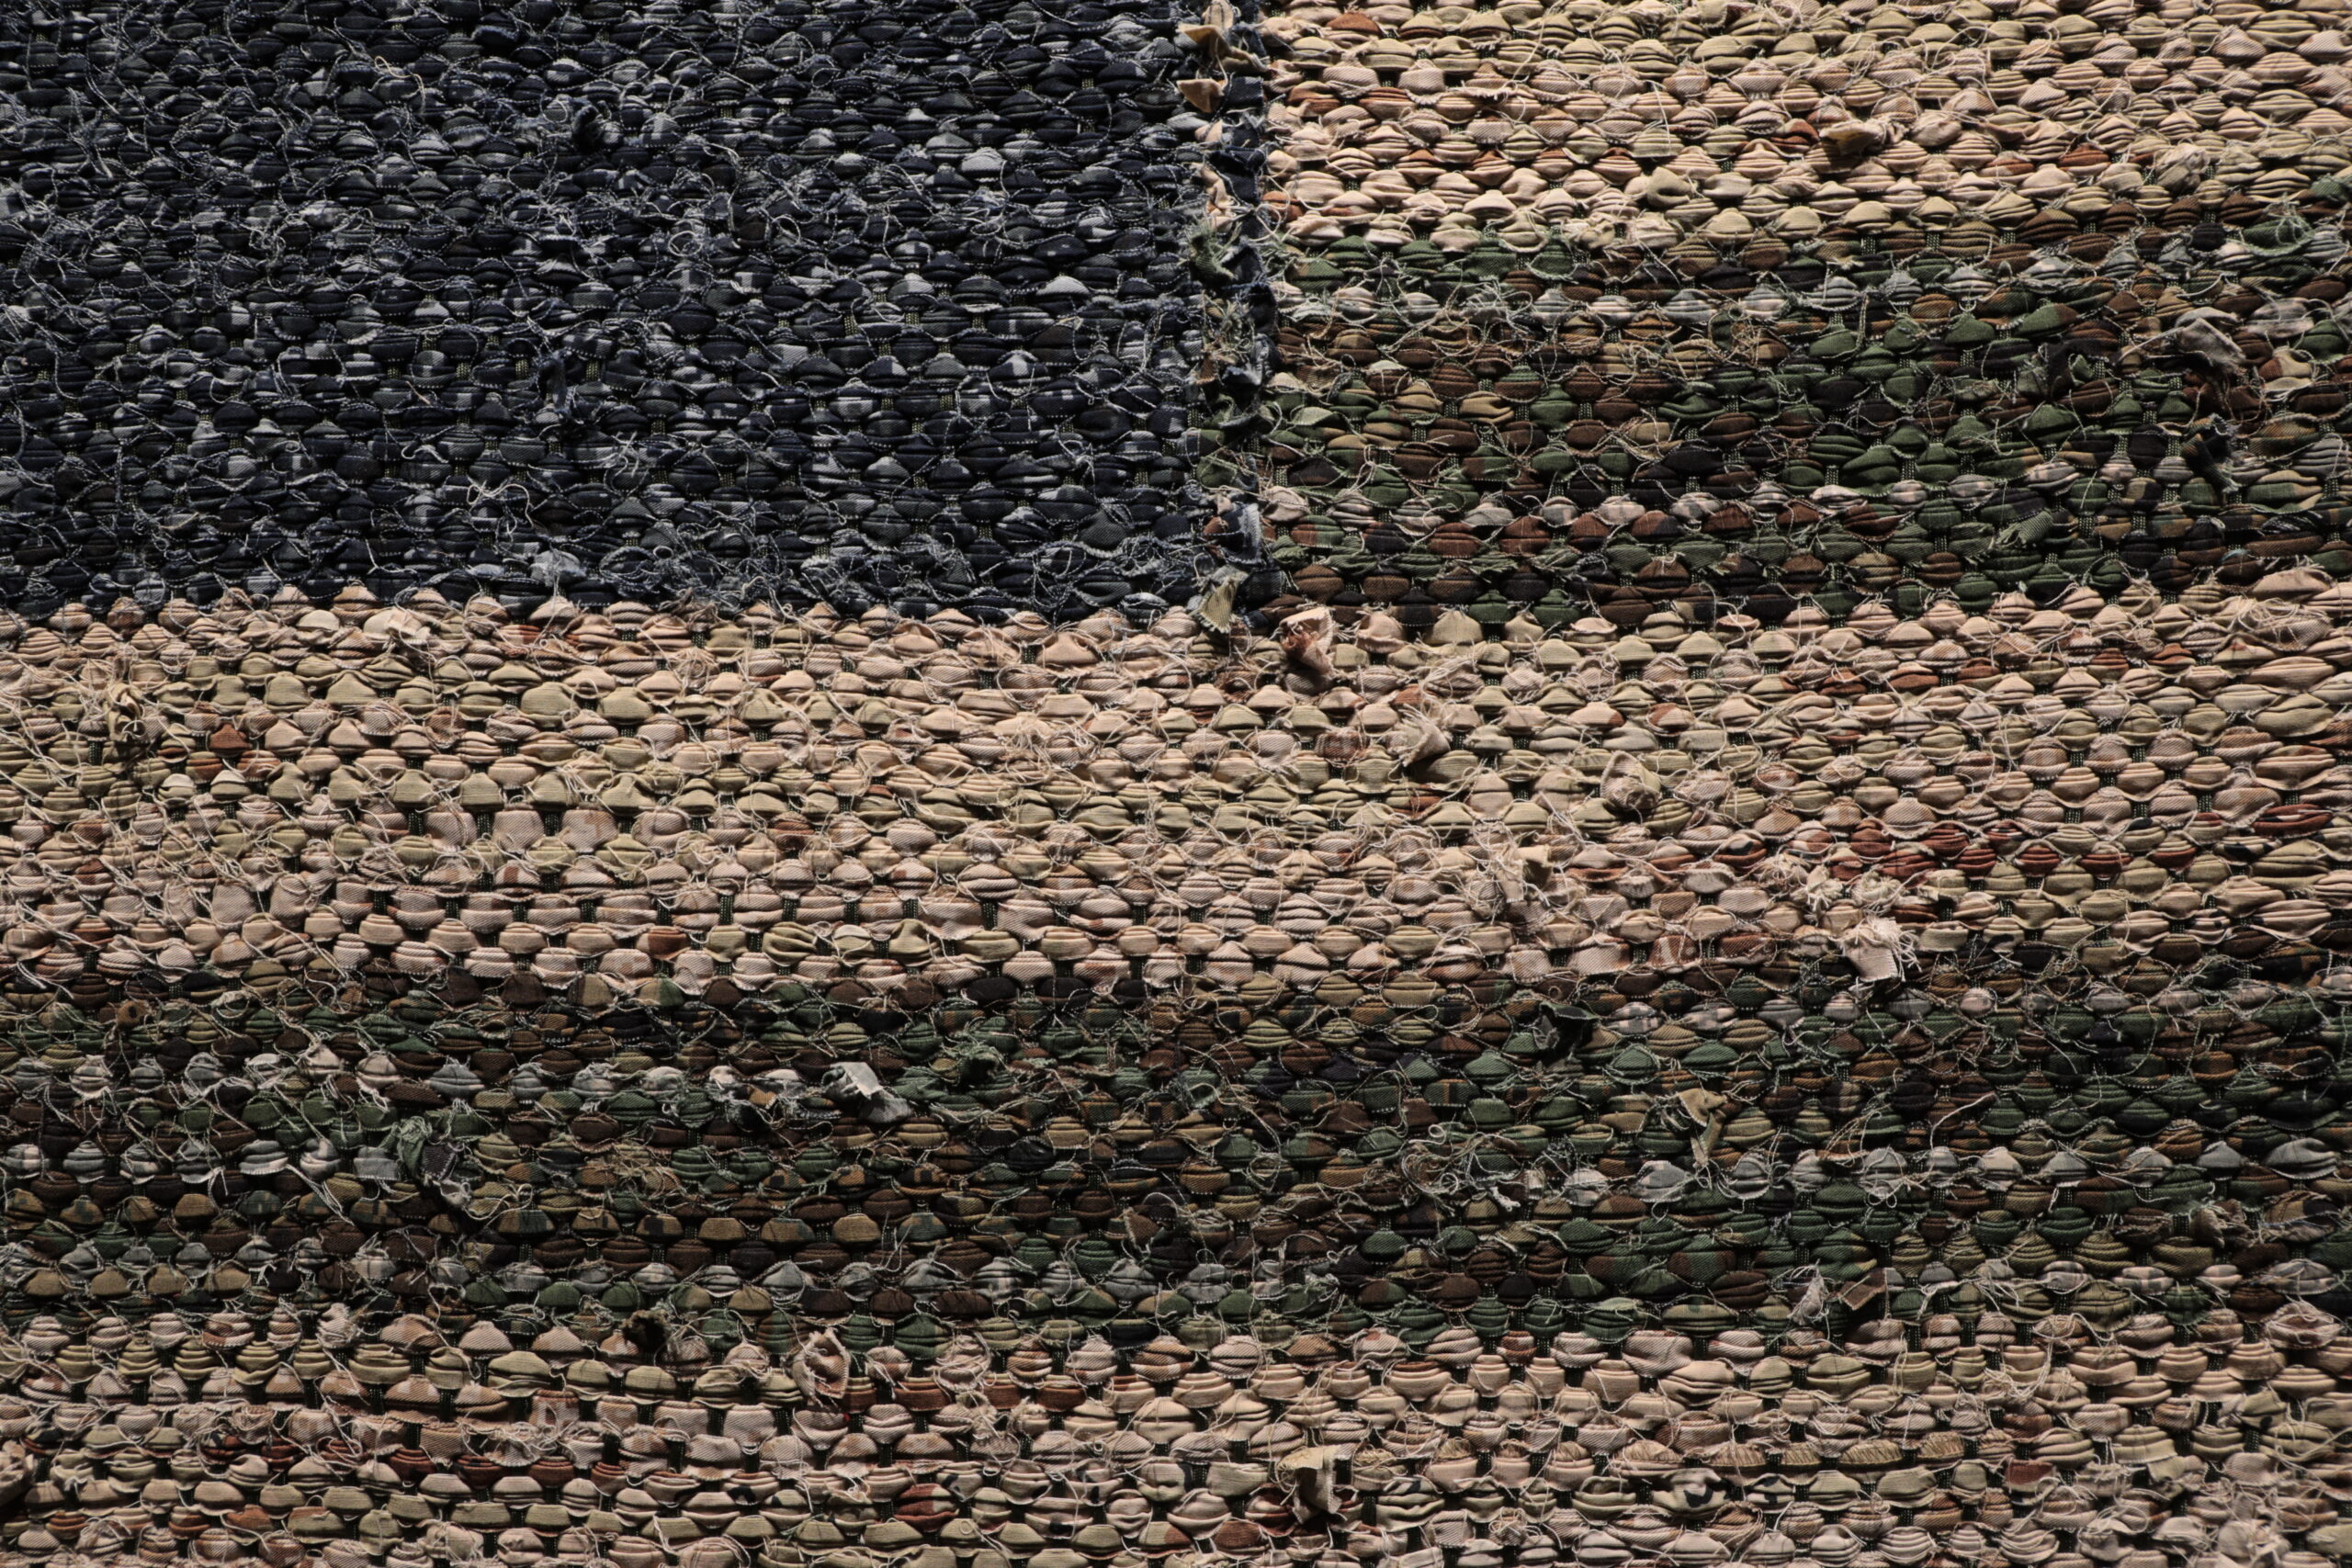 Close up view of a blue, green and khaki material from the uniforms of military service members woven into an American flag.